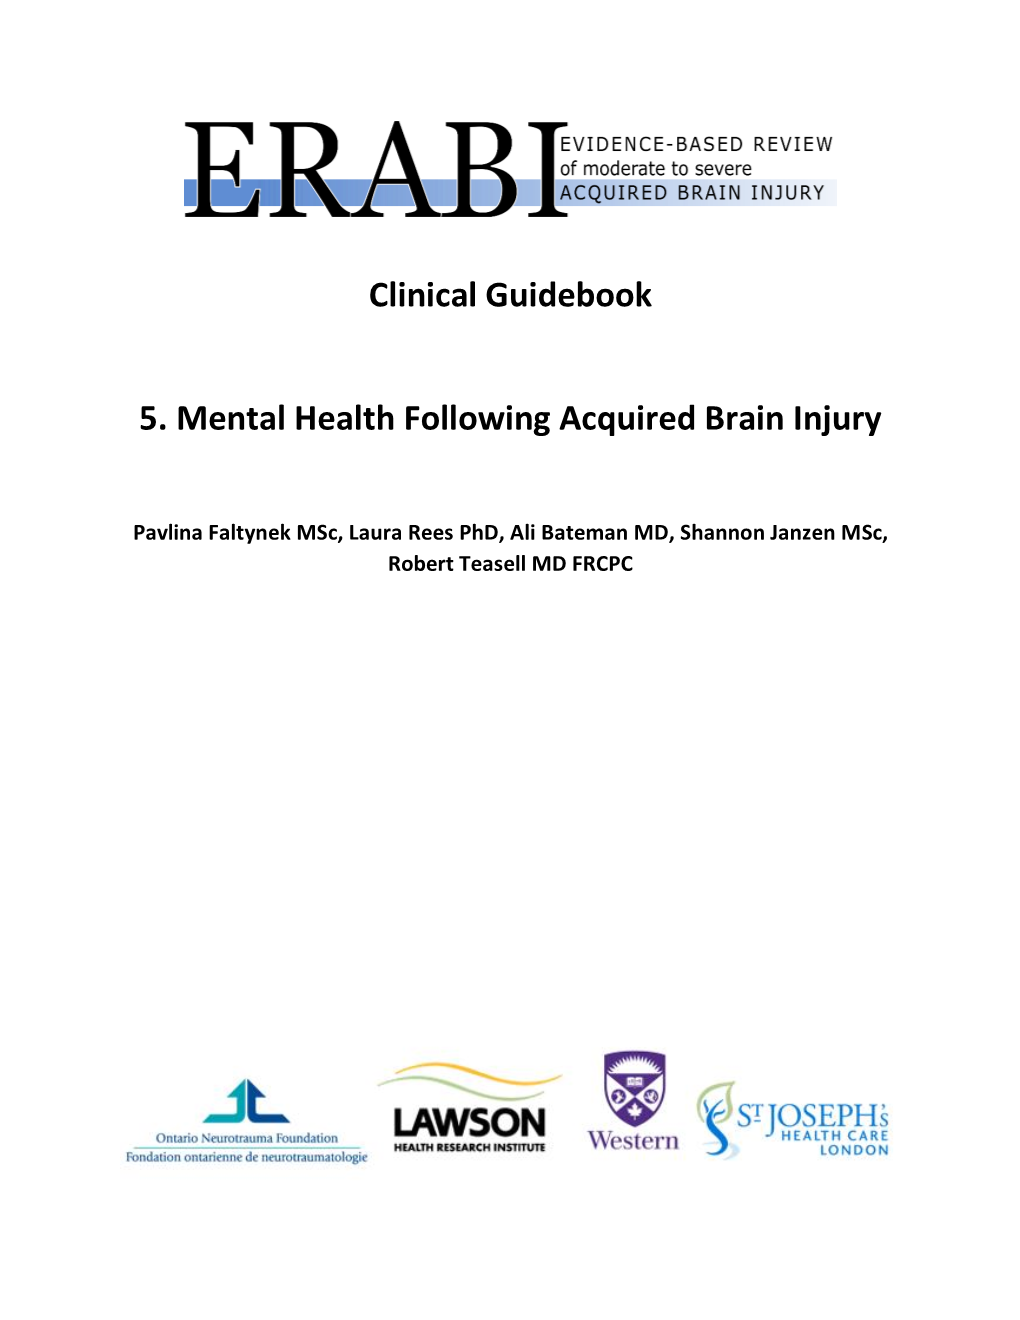 Clinical Guidebook 5. Mental Health Following Acquired Brain Injury